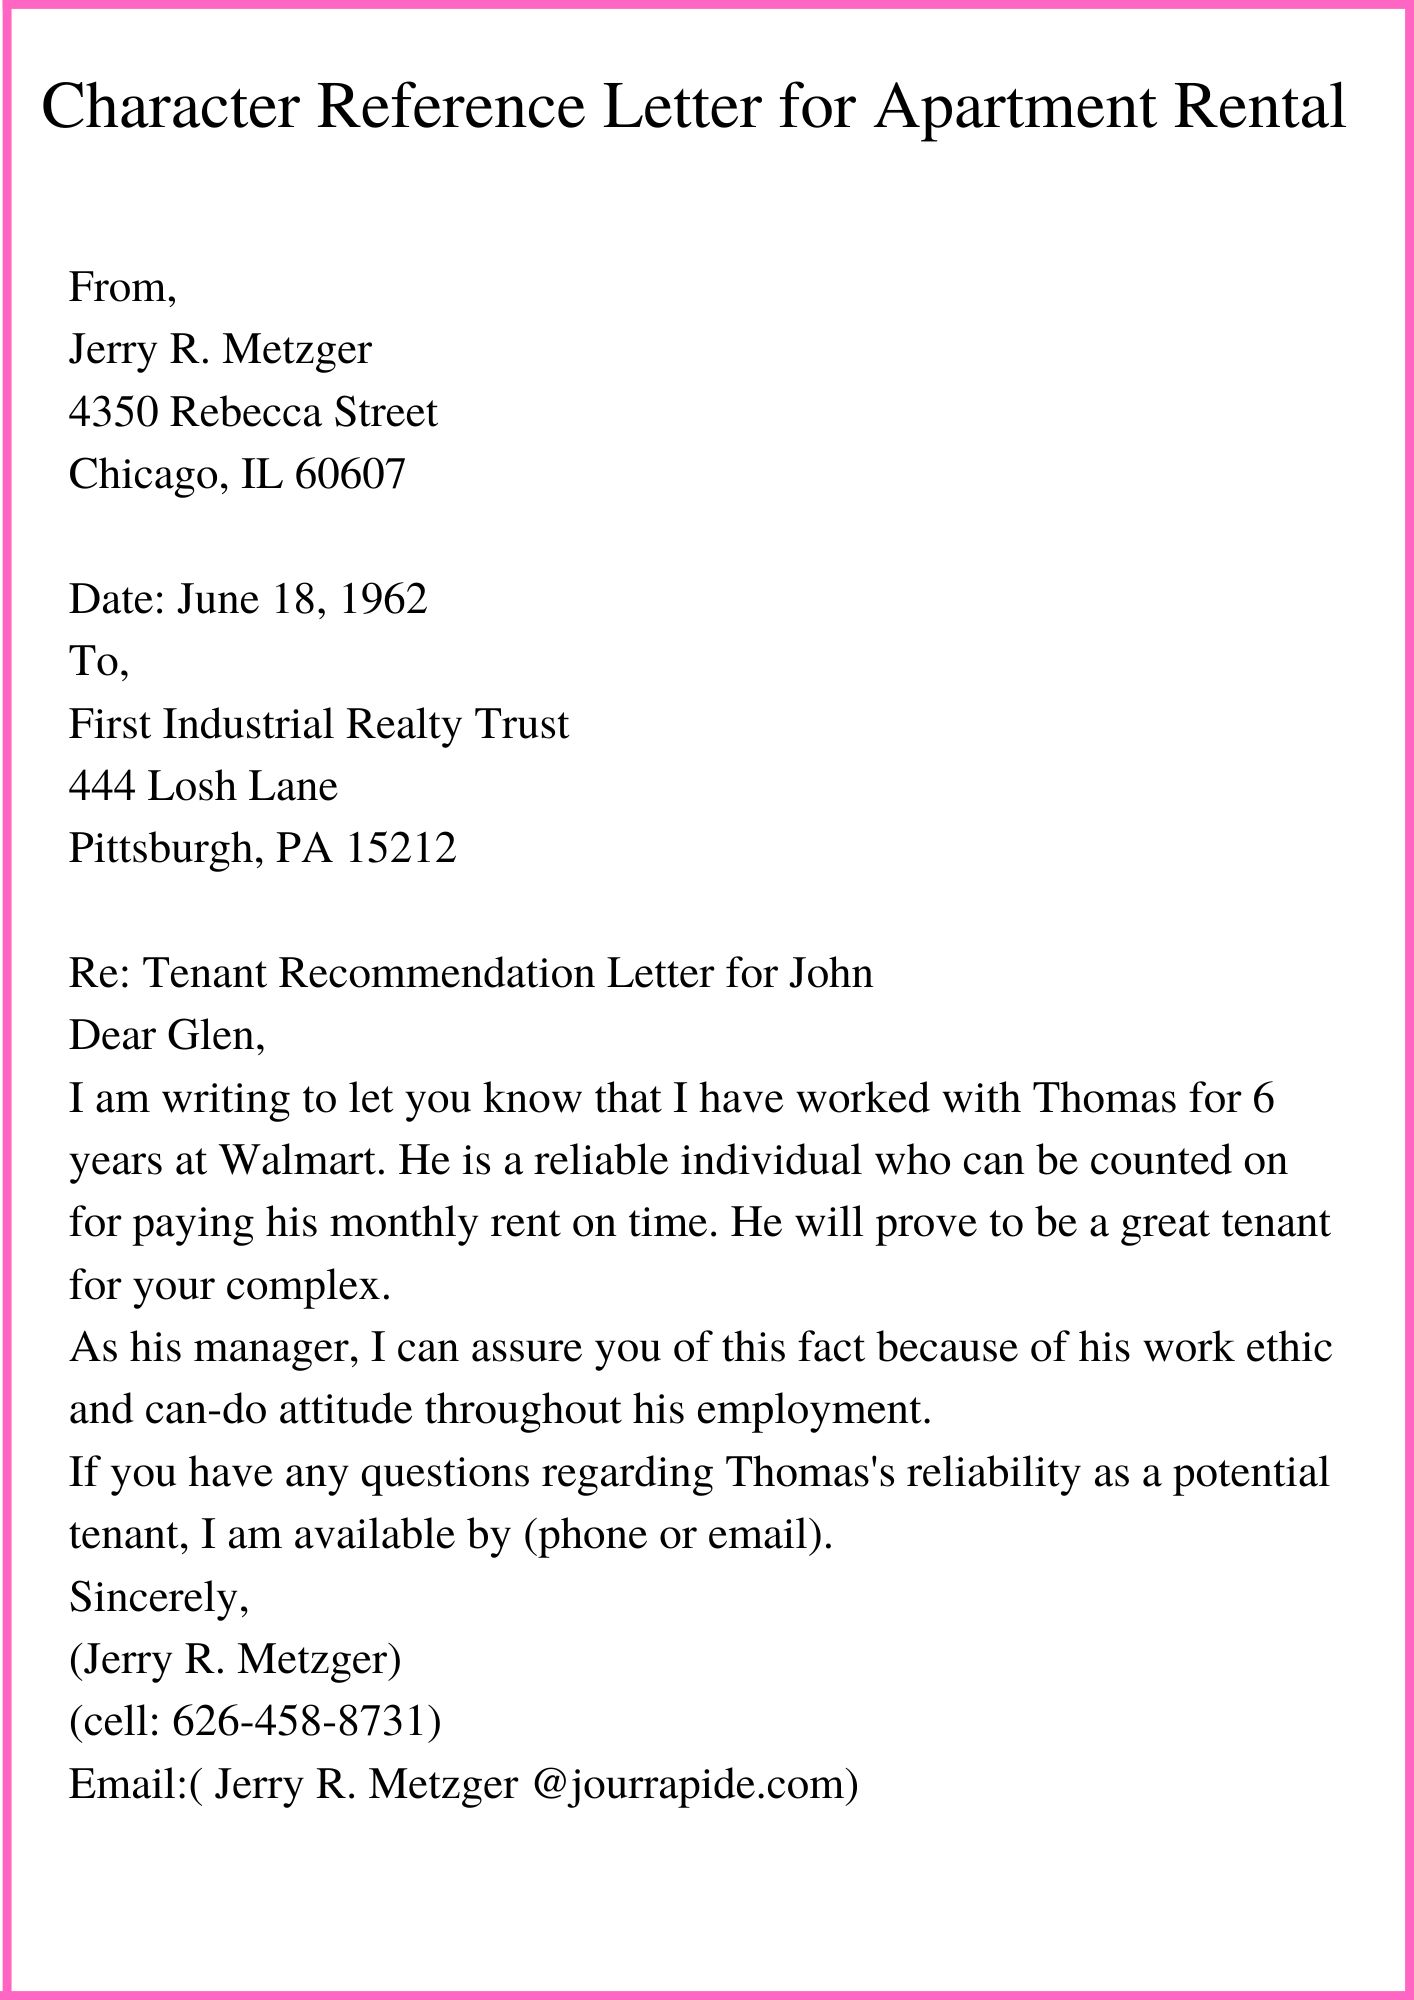 Character Reference Letter for Apartment Rental